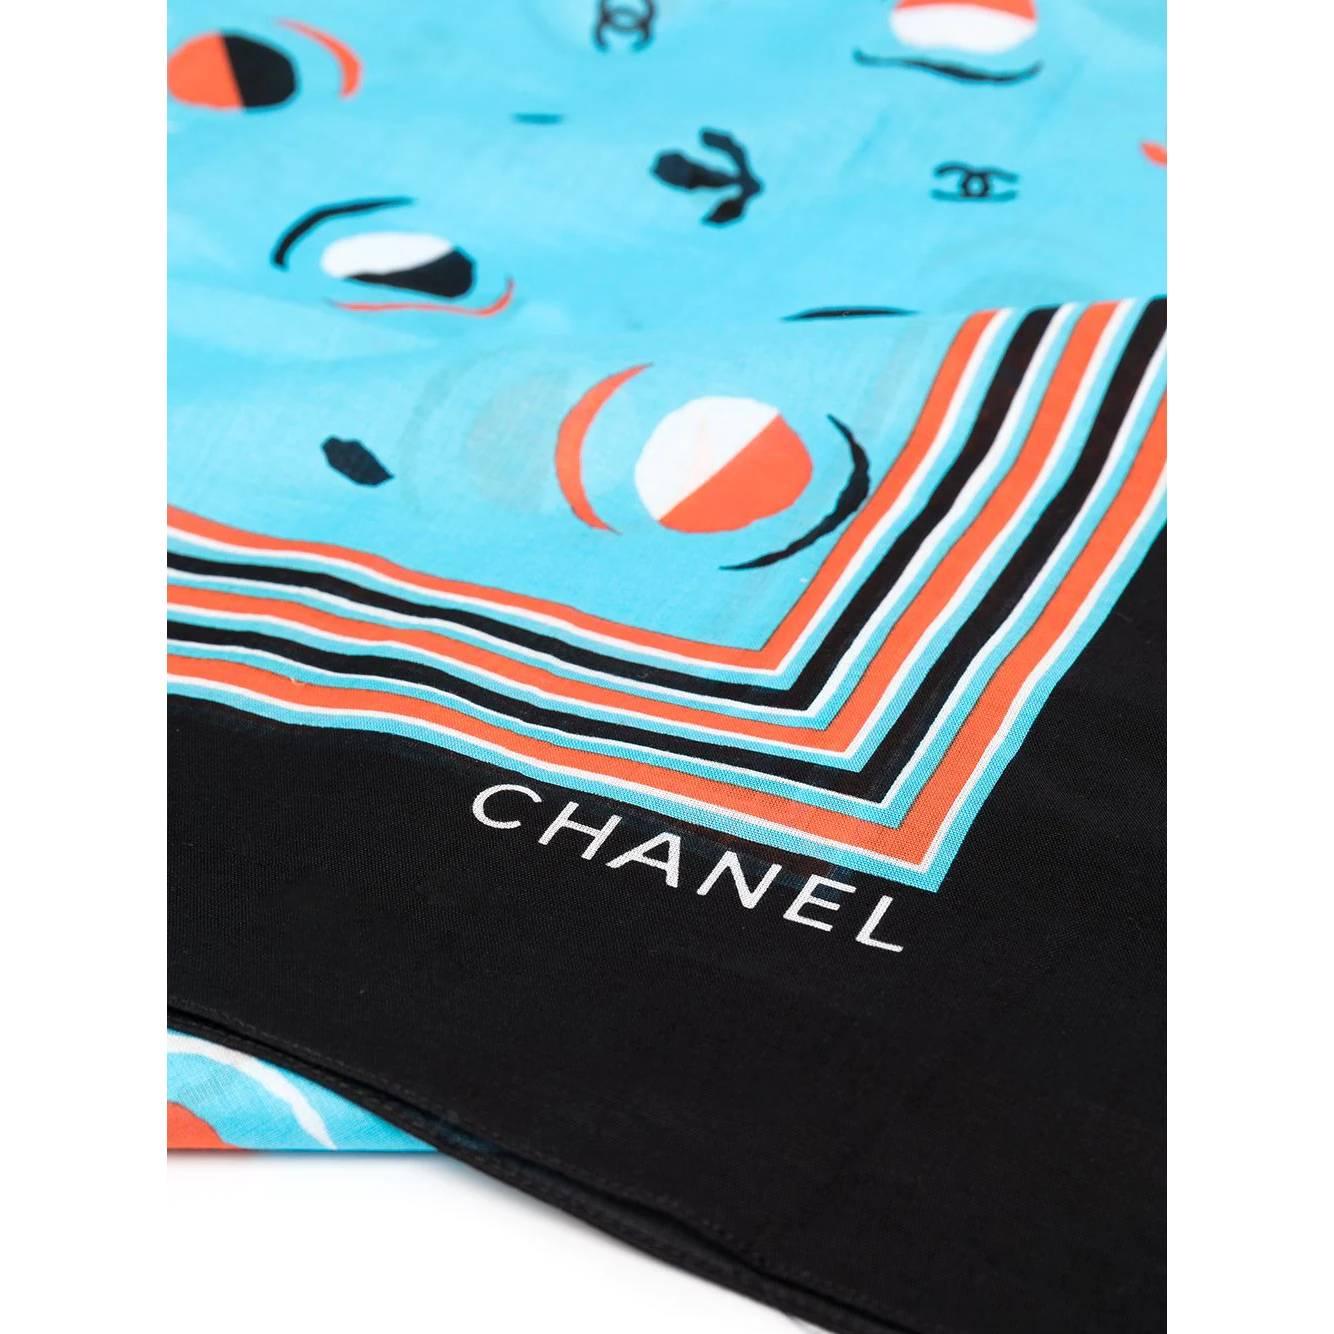 A.N.G.E.L.O. Vintage - ITALY
Chanel light blue cotton scarf with abstract print in shades of black, white and orange and CC logos.

Years: 90s

Made in Italy

Measurements: 105 x 150 cm